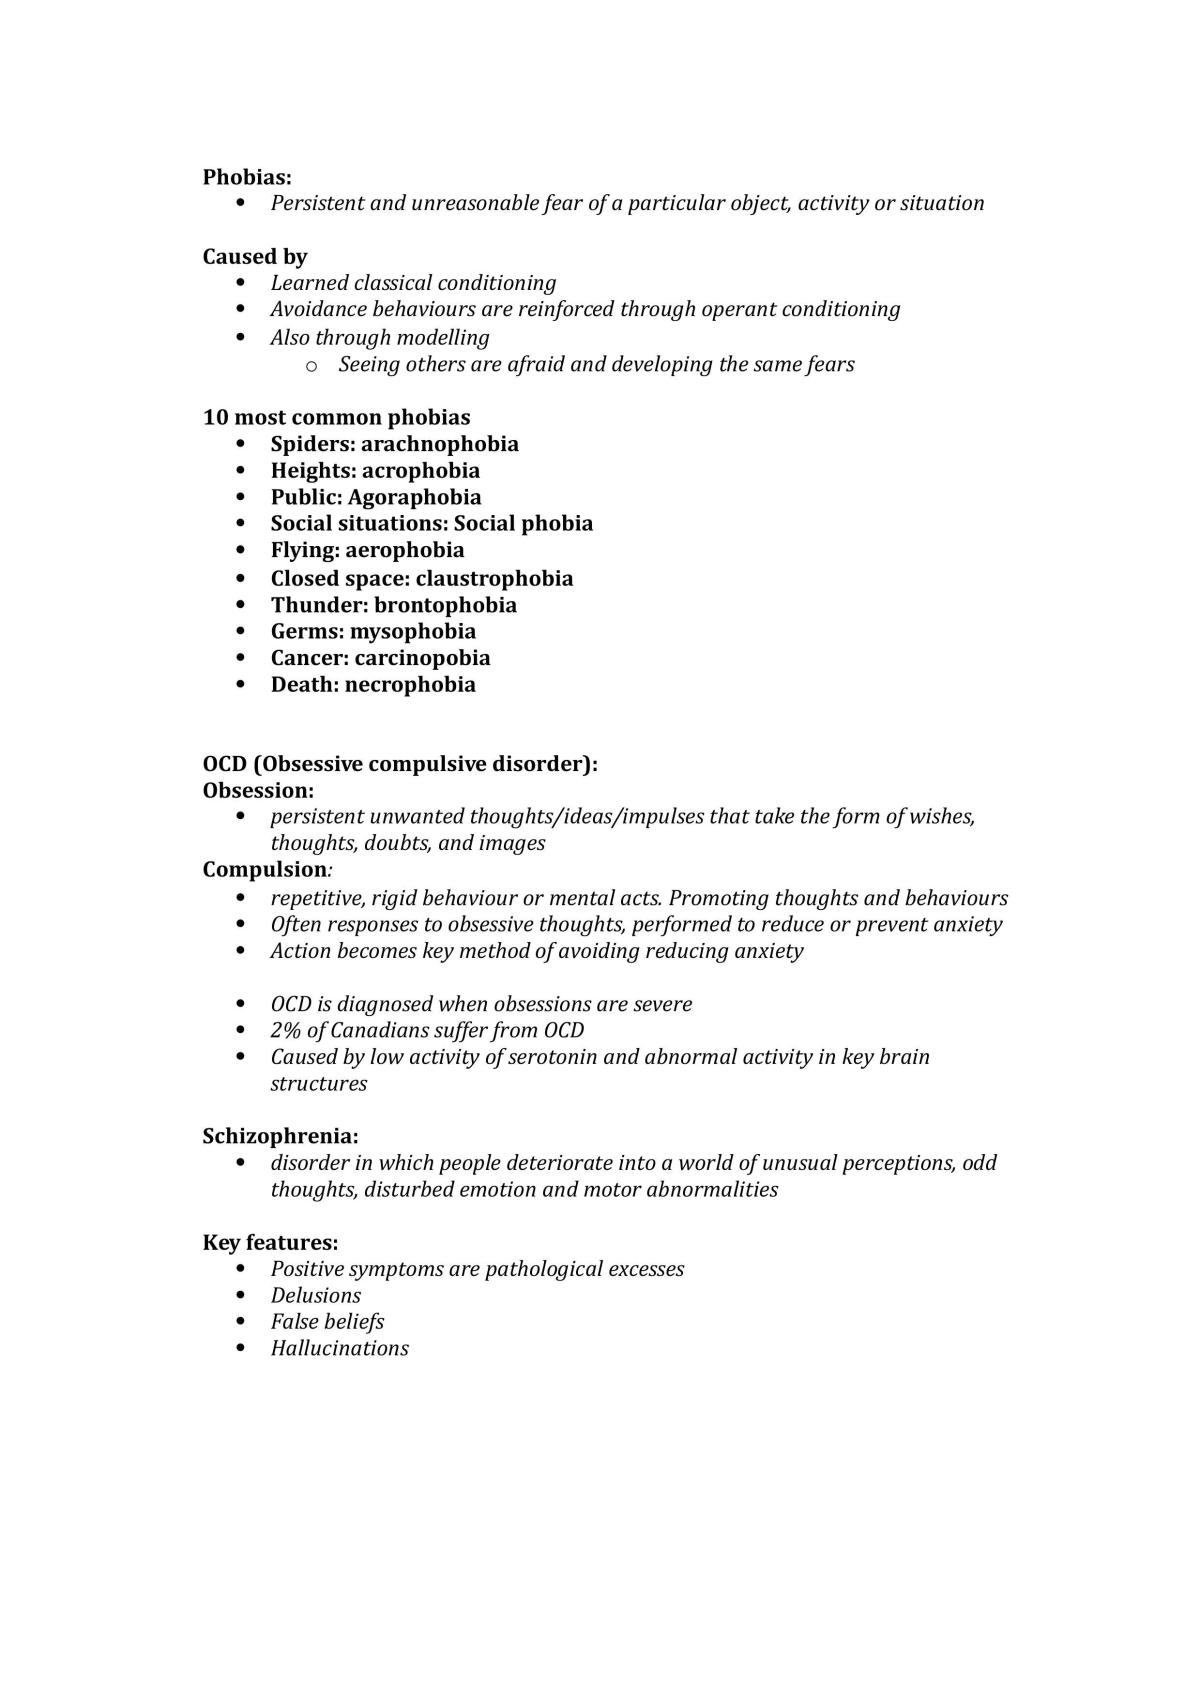 Introduction to Psychology Notes chapters 13 to 16 - Page 15